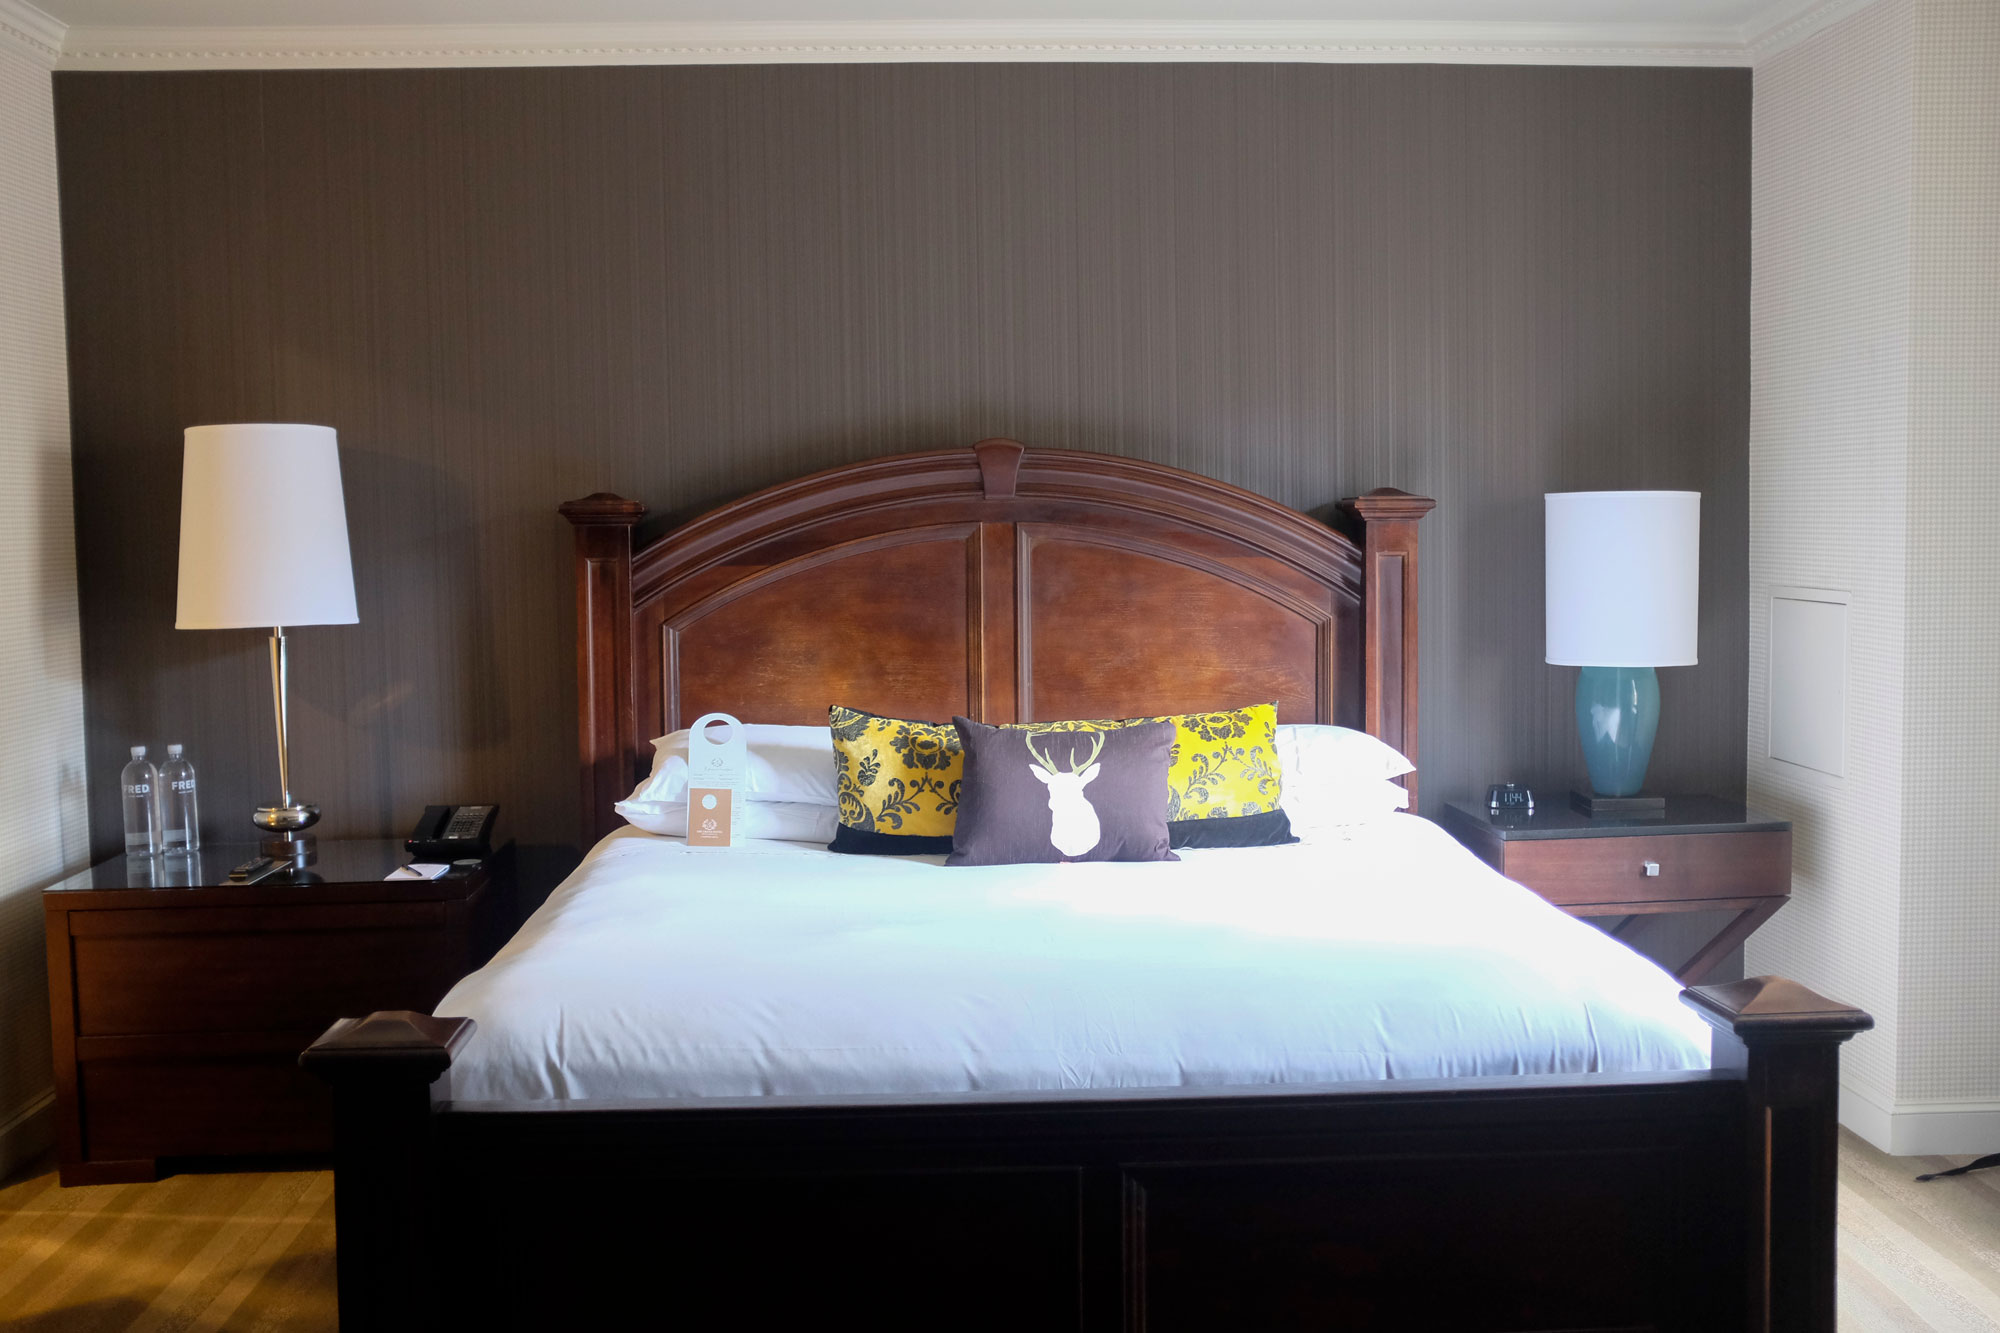 photo of bed in grand hotel room